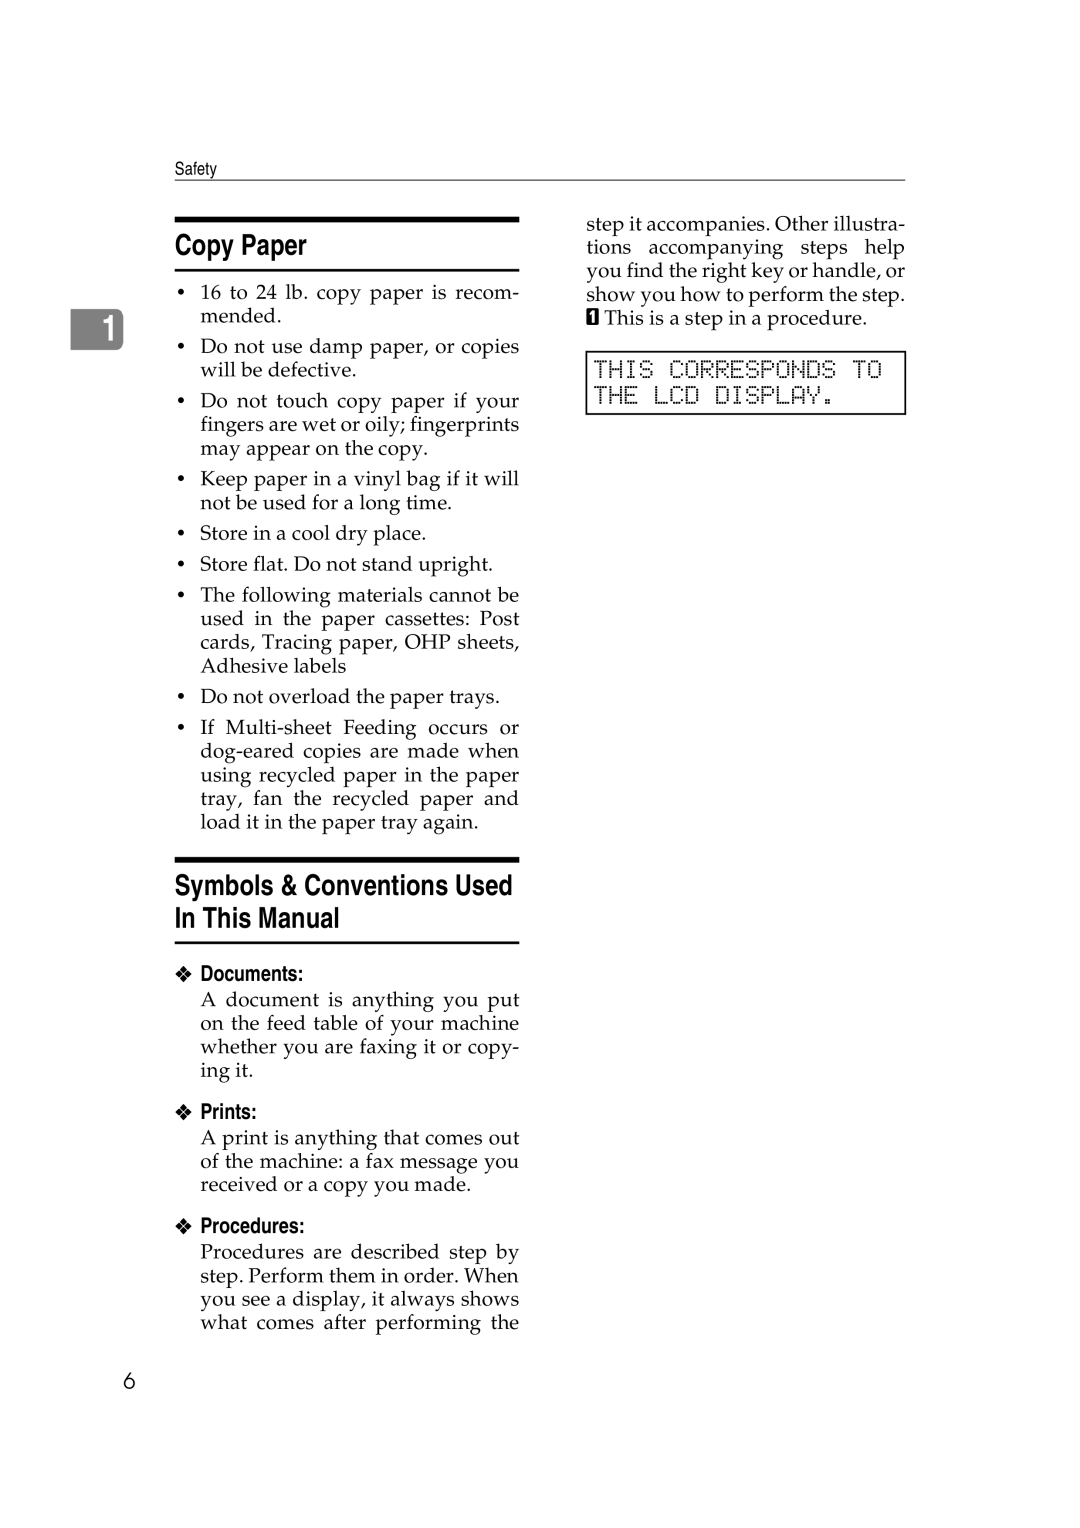 Ricoh H545 manual Copy Paper, Symbols & Conventions Used In This Manual, This Corresponds to the LCD Display 